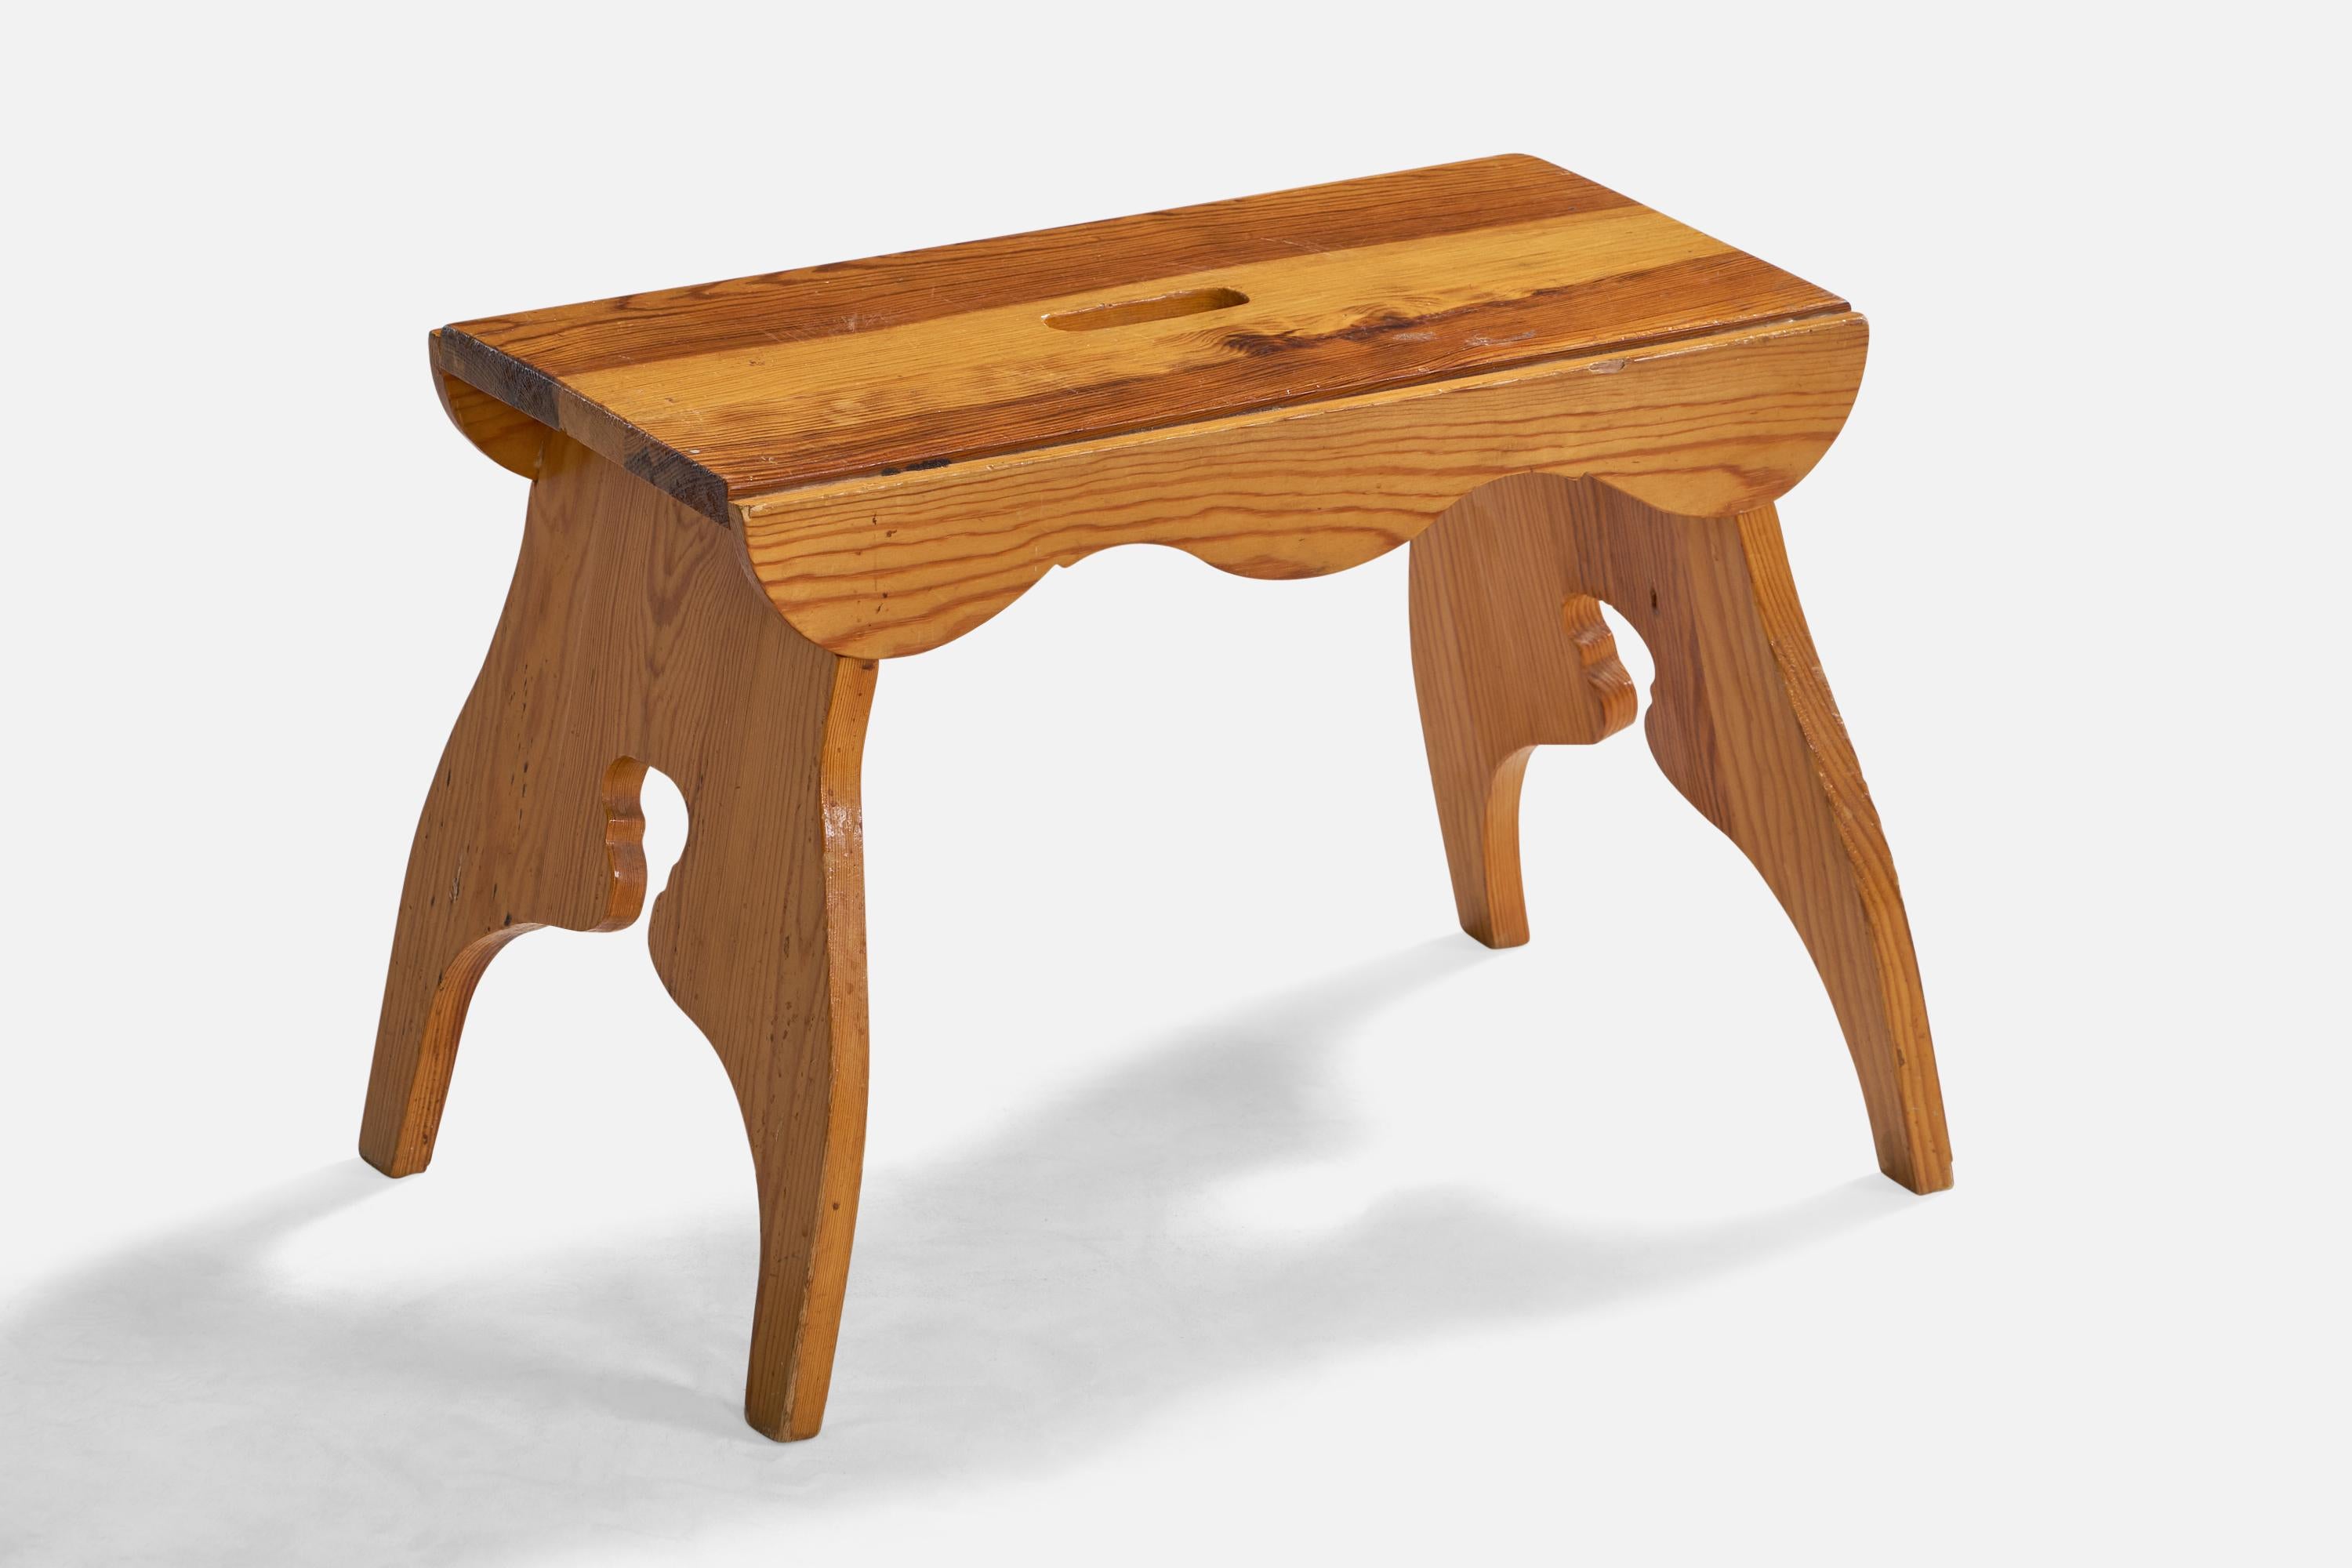 A pine stool designed and produced in Sweden, c. 1960s.

Seat height: 12.88”